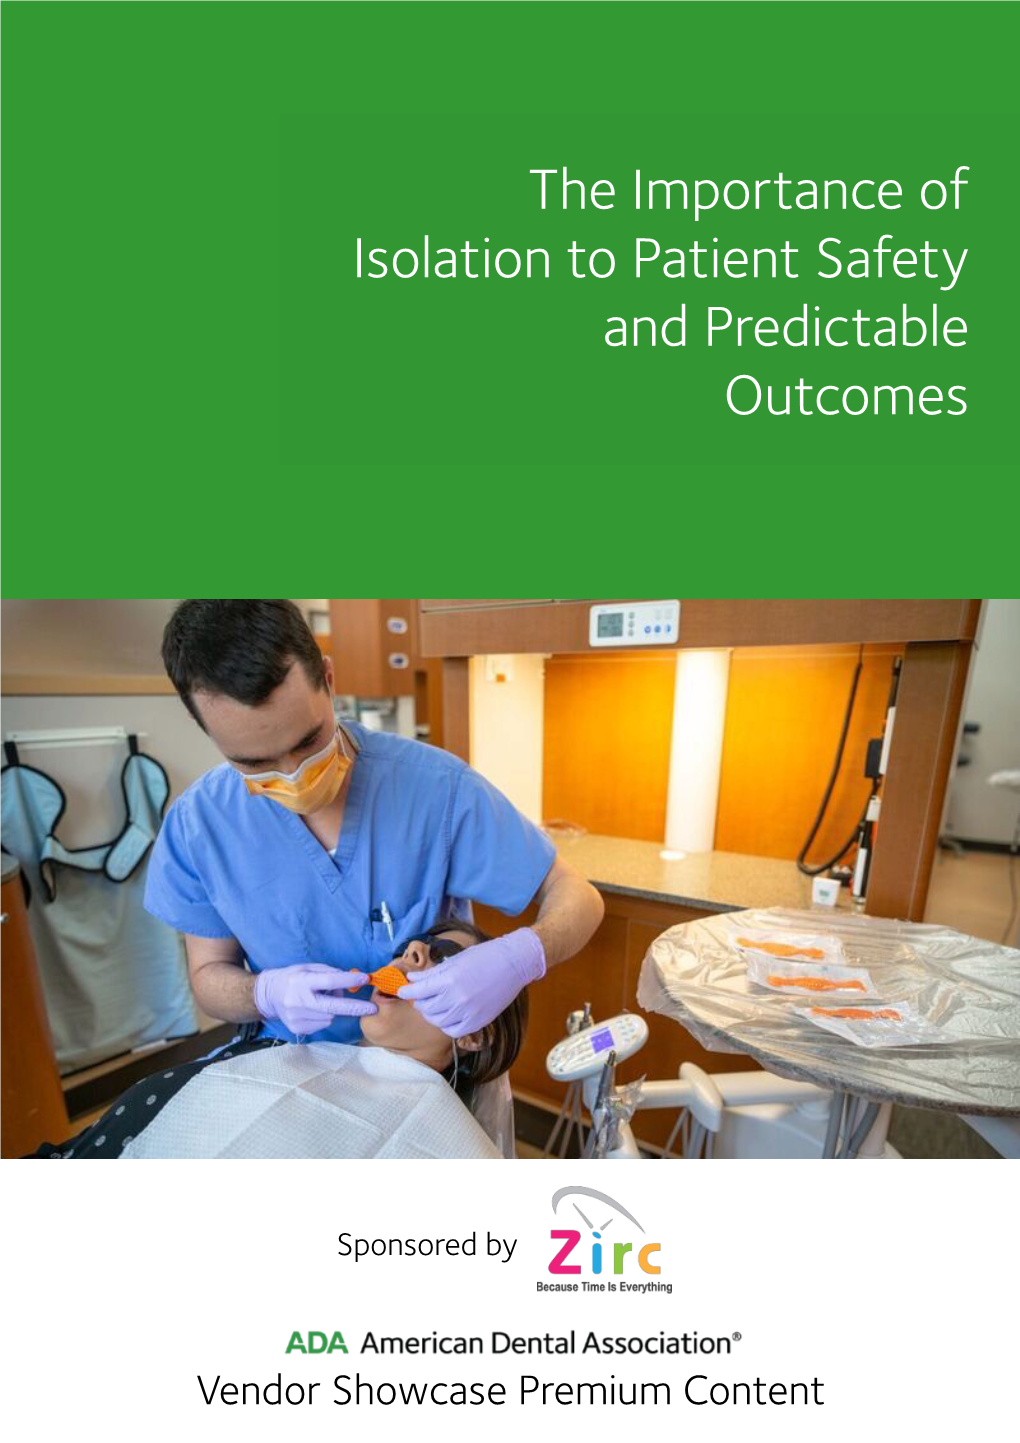 The Importance of Isolation to Patient Safety and Predictable Outcomes